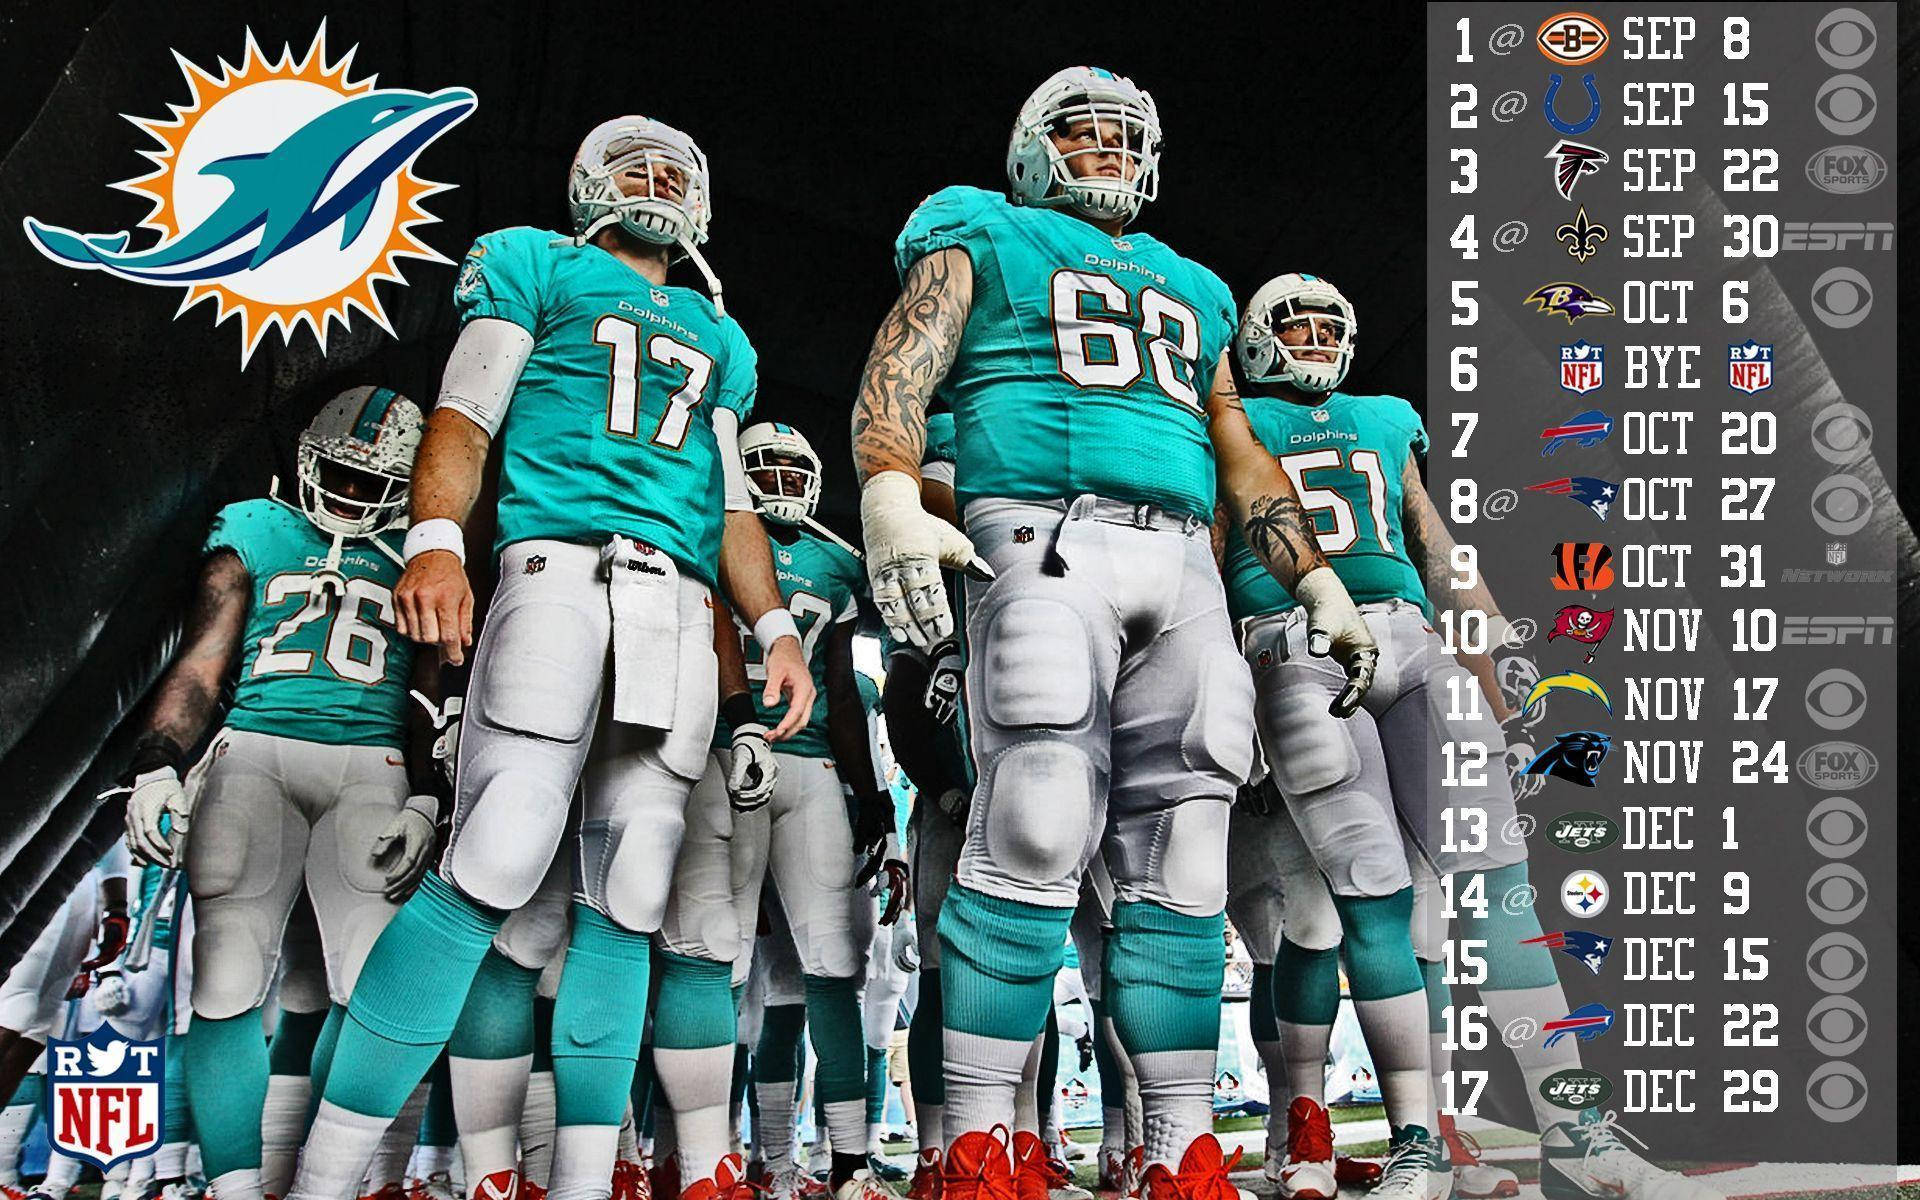 Nfl Miami Dolphins Players With Ryan Tannehill Wallpaper